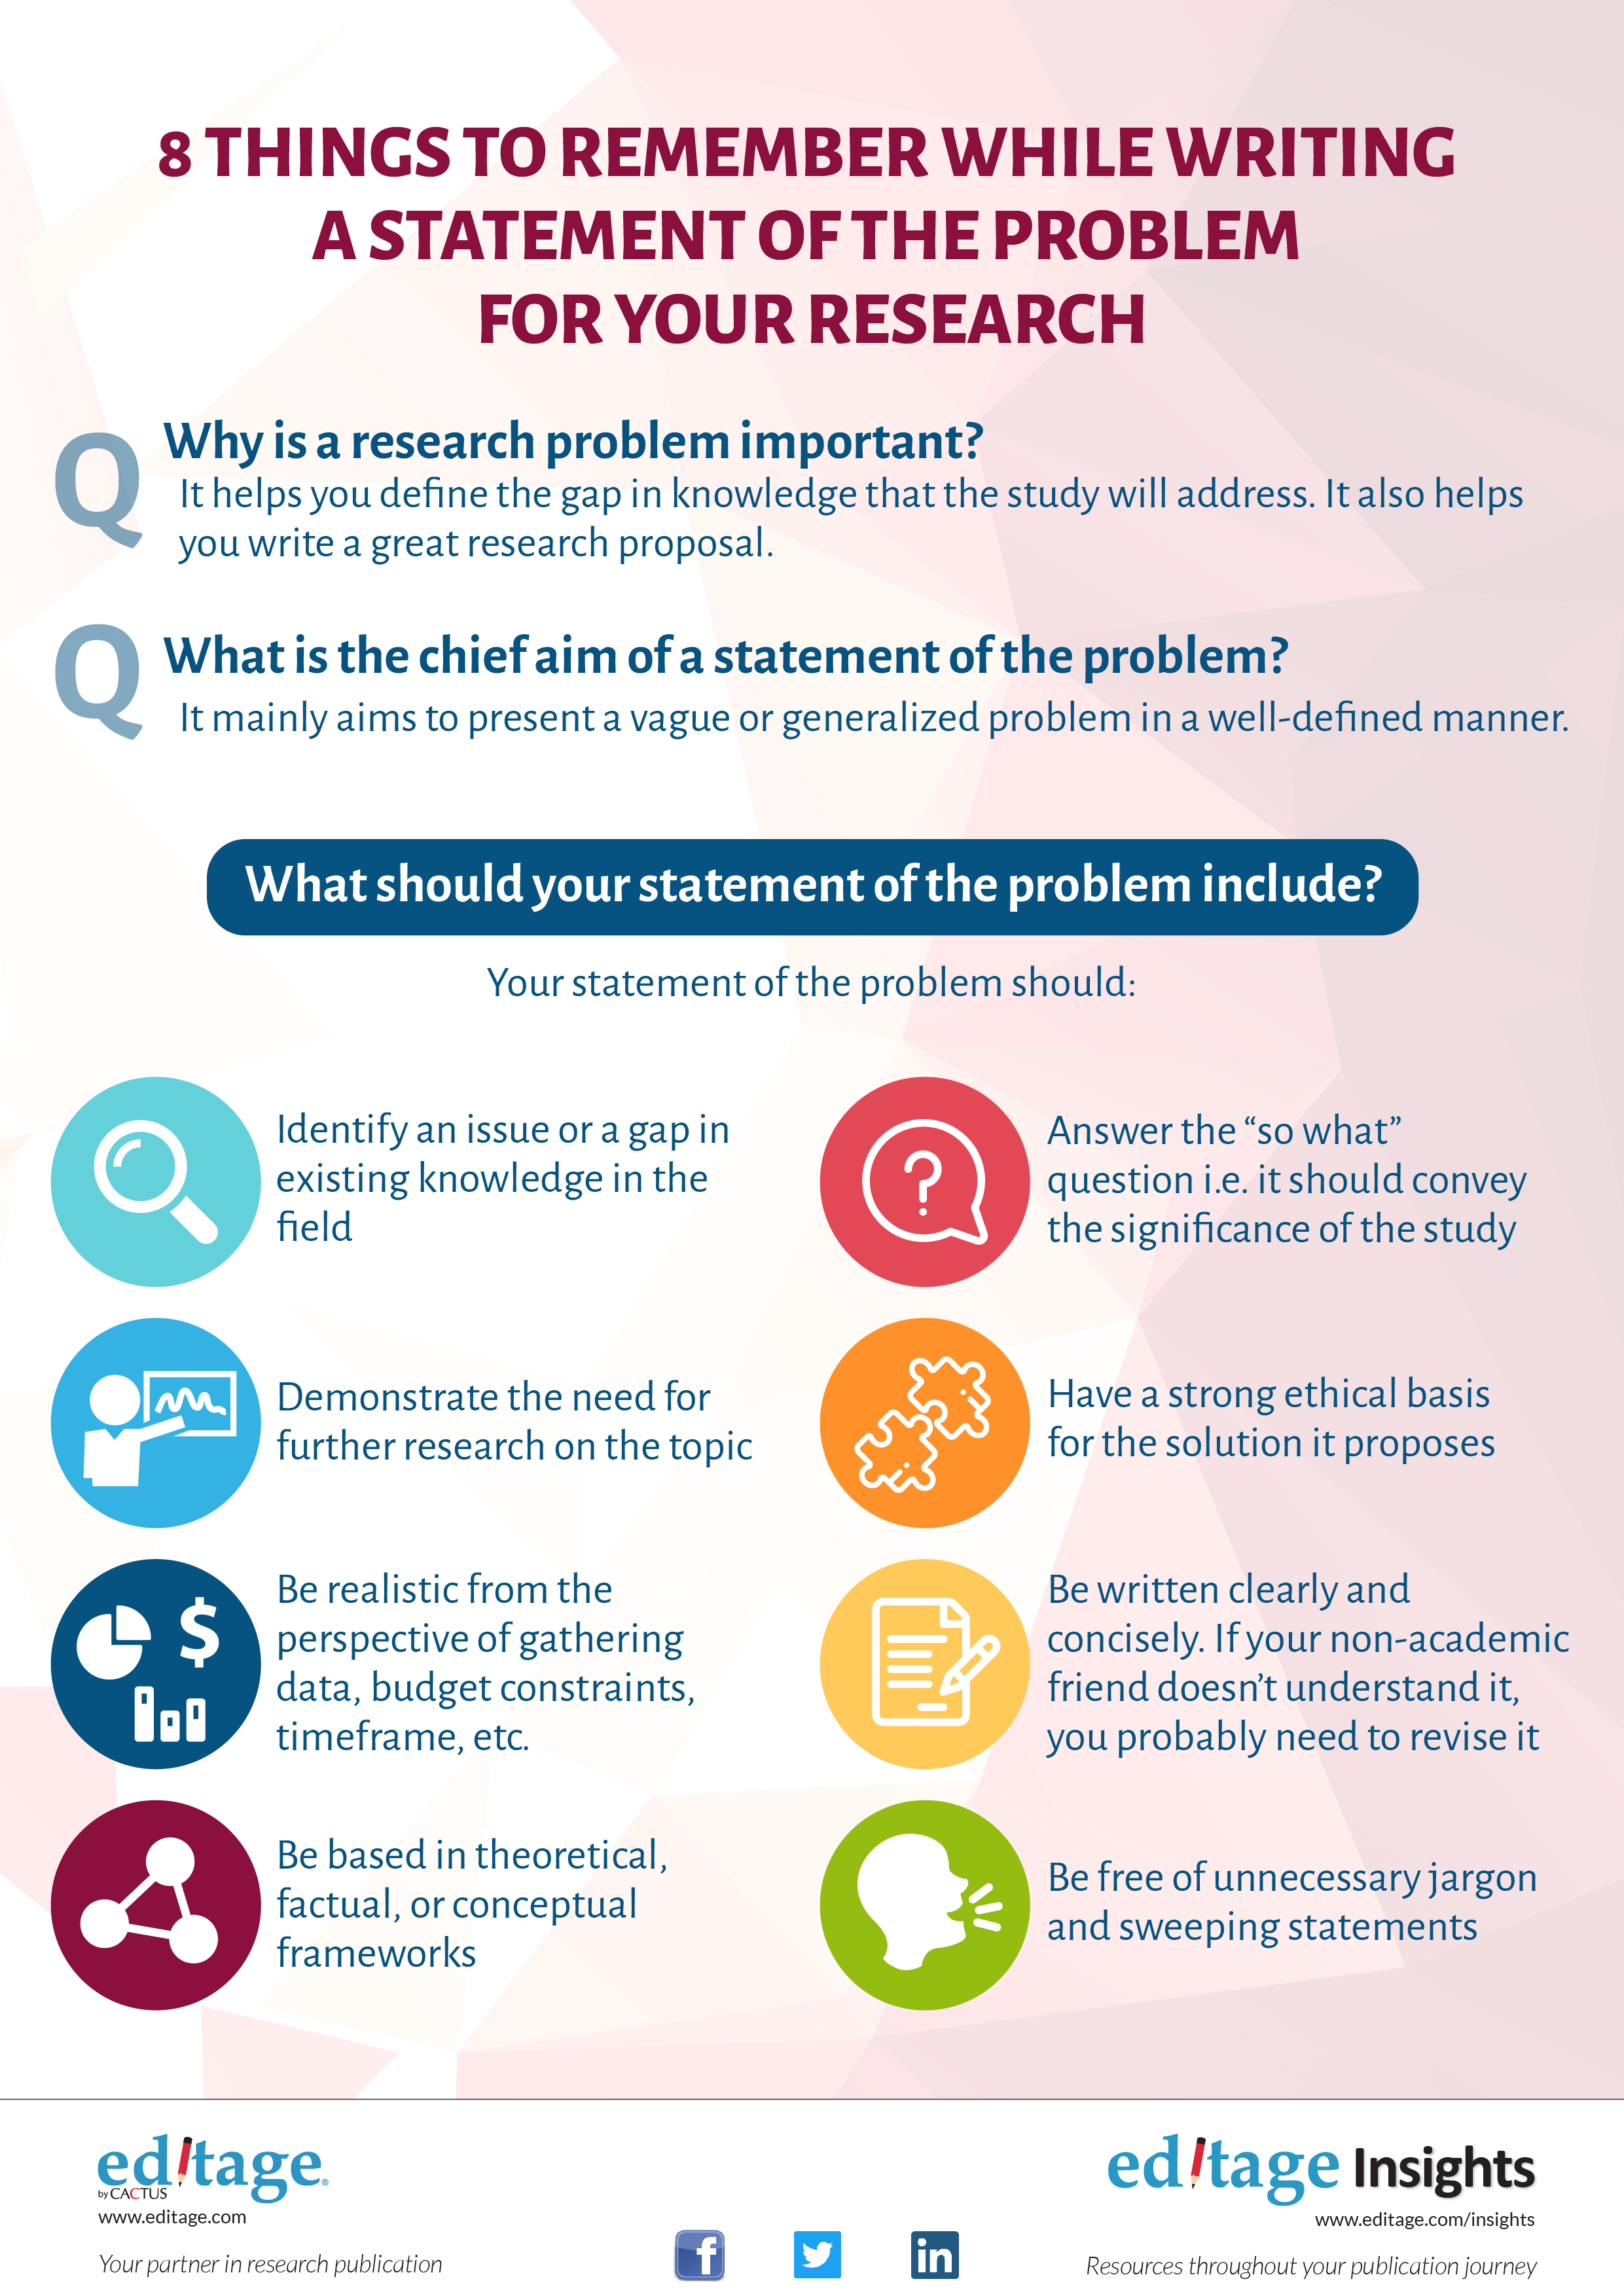 27 Things to remember when writing a statement of the problem